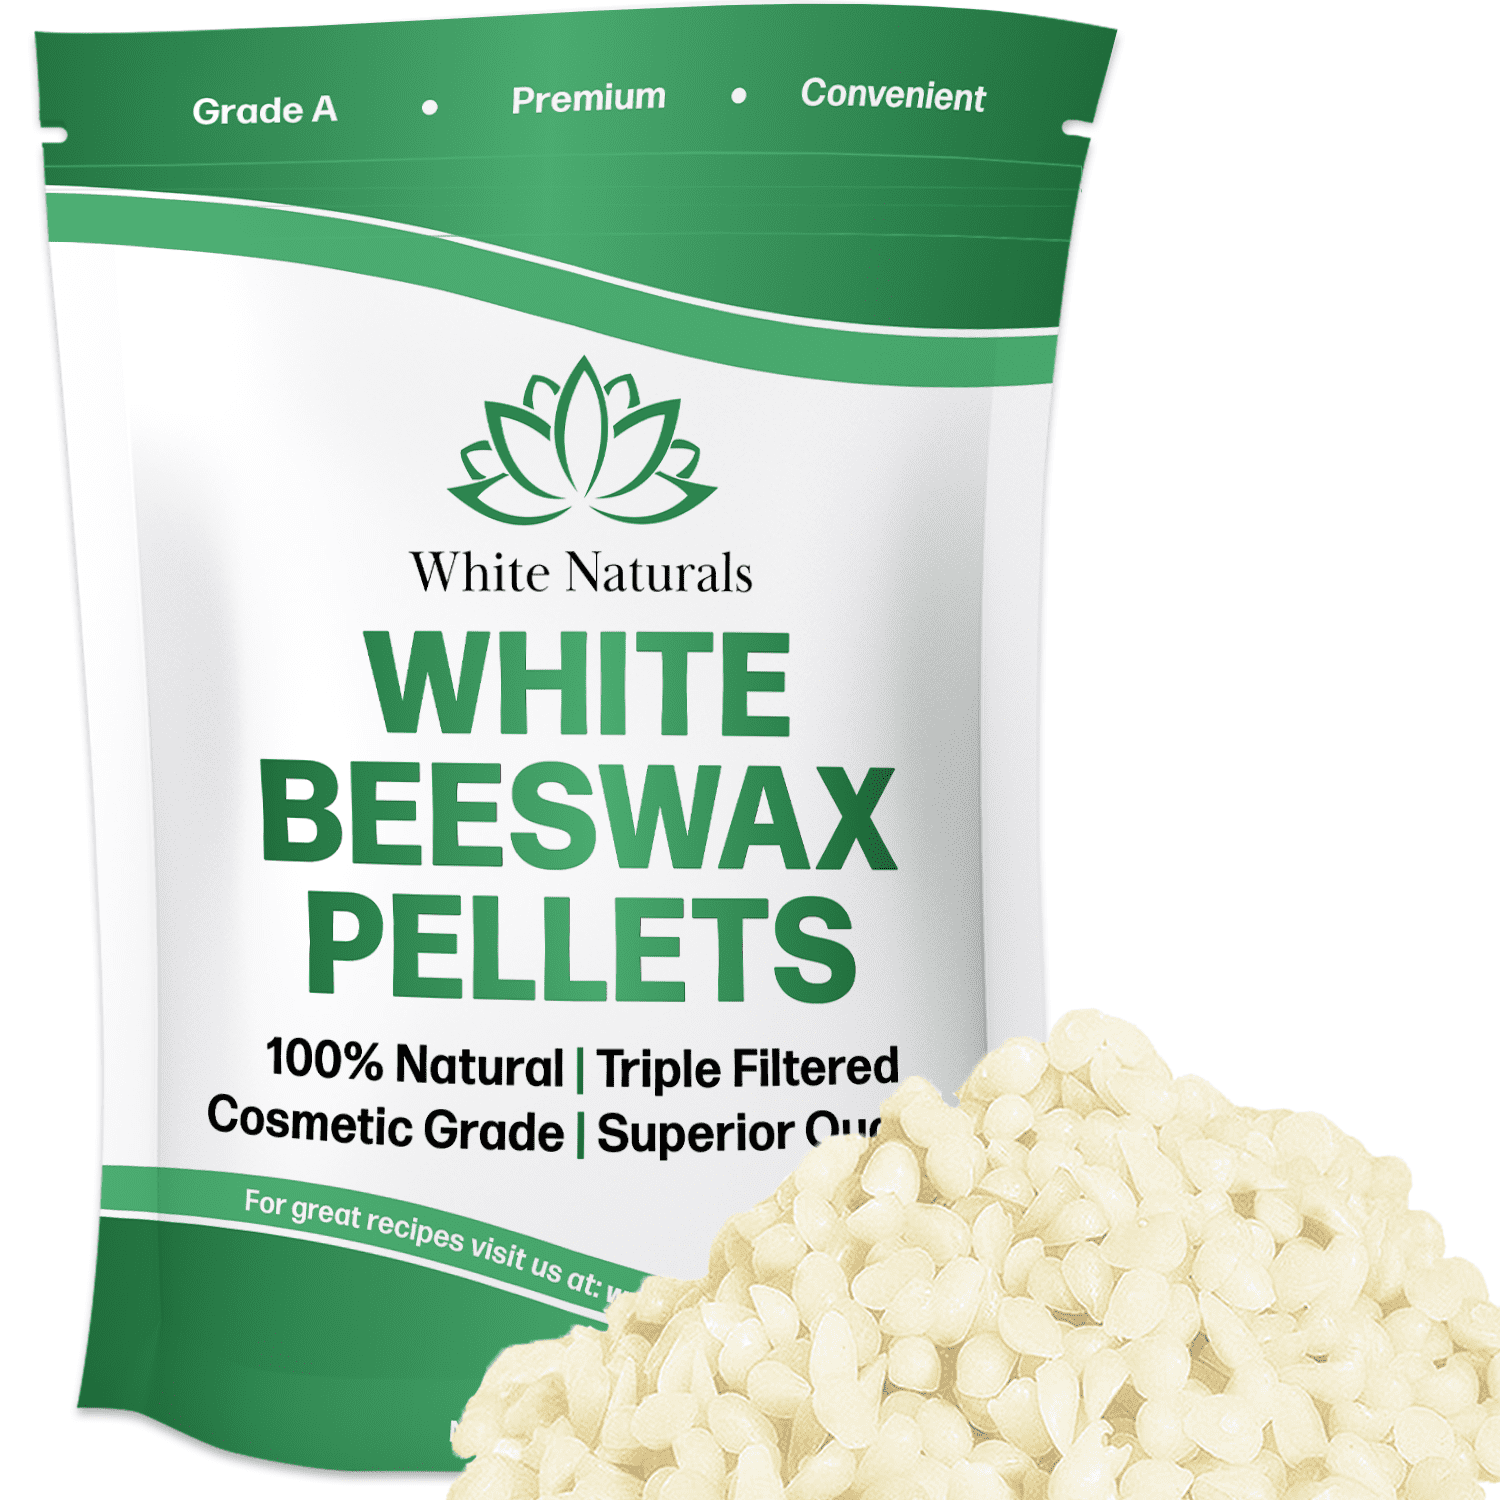  Gadojuewo White Beeswax Pellets Organic Beeswax - 425g Pure  Beeswax for Candle Making,Beeswax Pellets for Skin,Bulk Beeswax for Lotion  DIY Creams Lotions Lip Balm and Soap Making Supplies（15OZ）